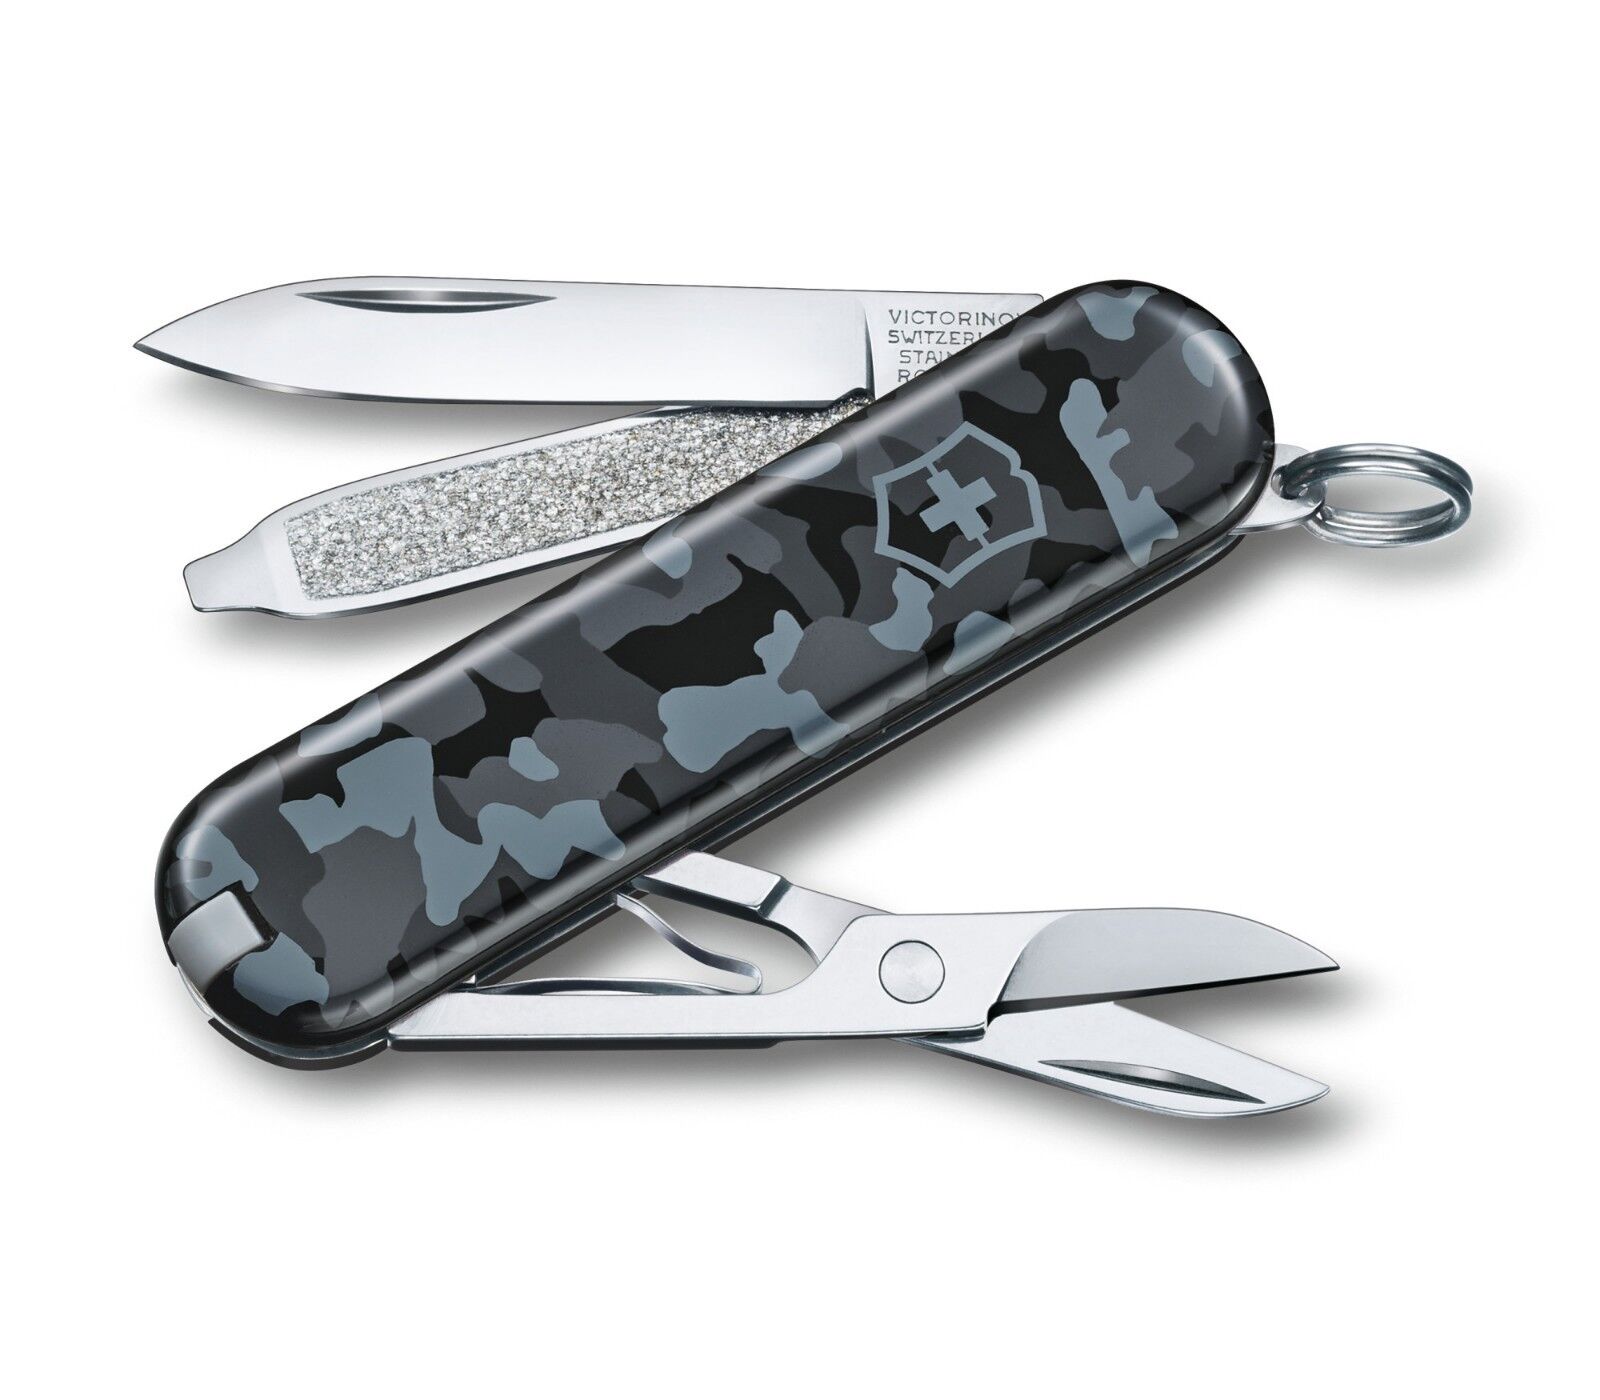 NEW VICTORINOX SWISS ARMY CLASSIC SD NAVY CAMOUFLAGE COLLECTION 0.6223.942US2 